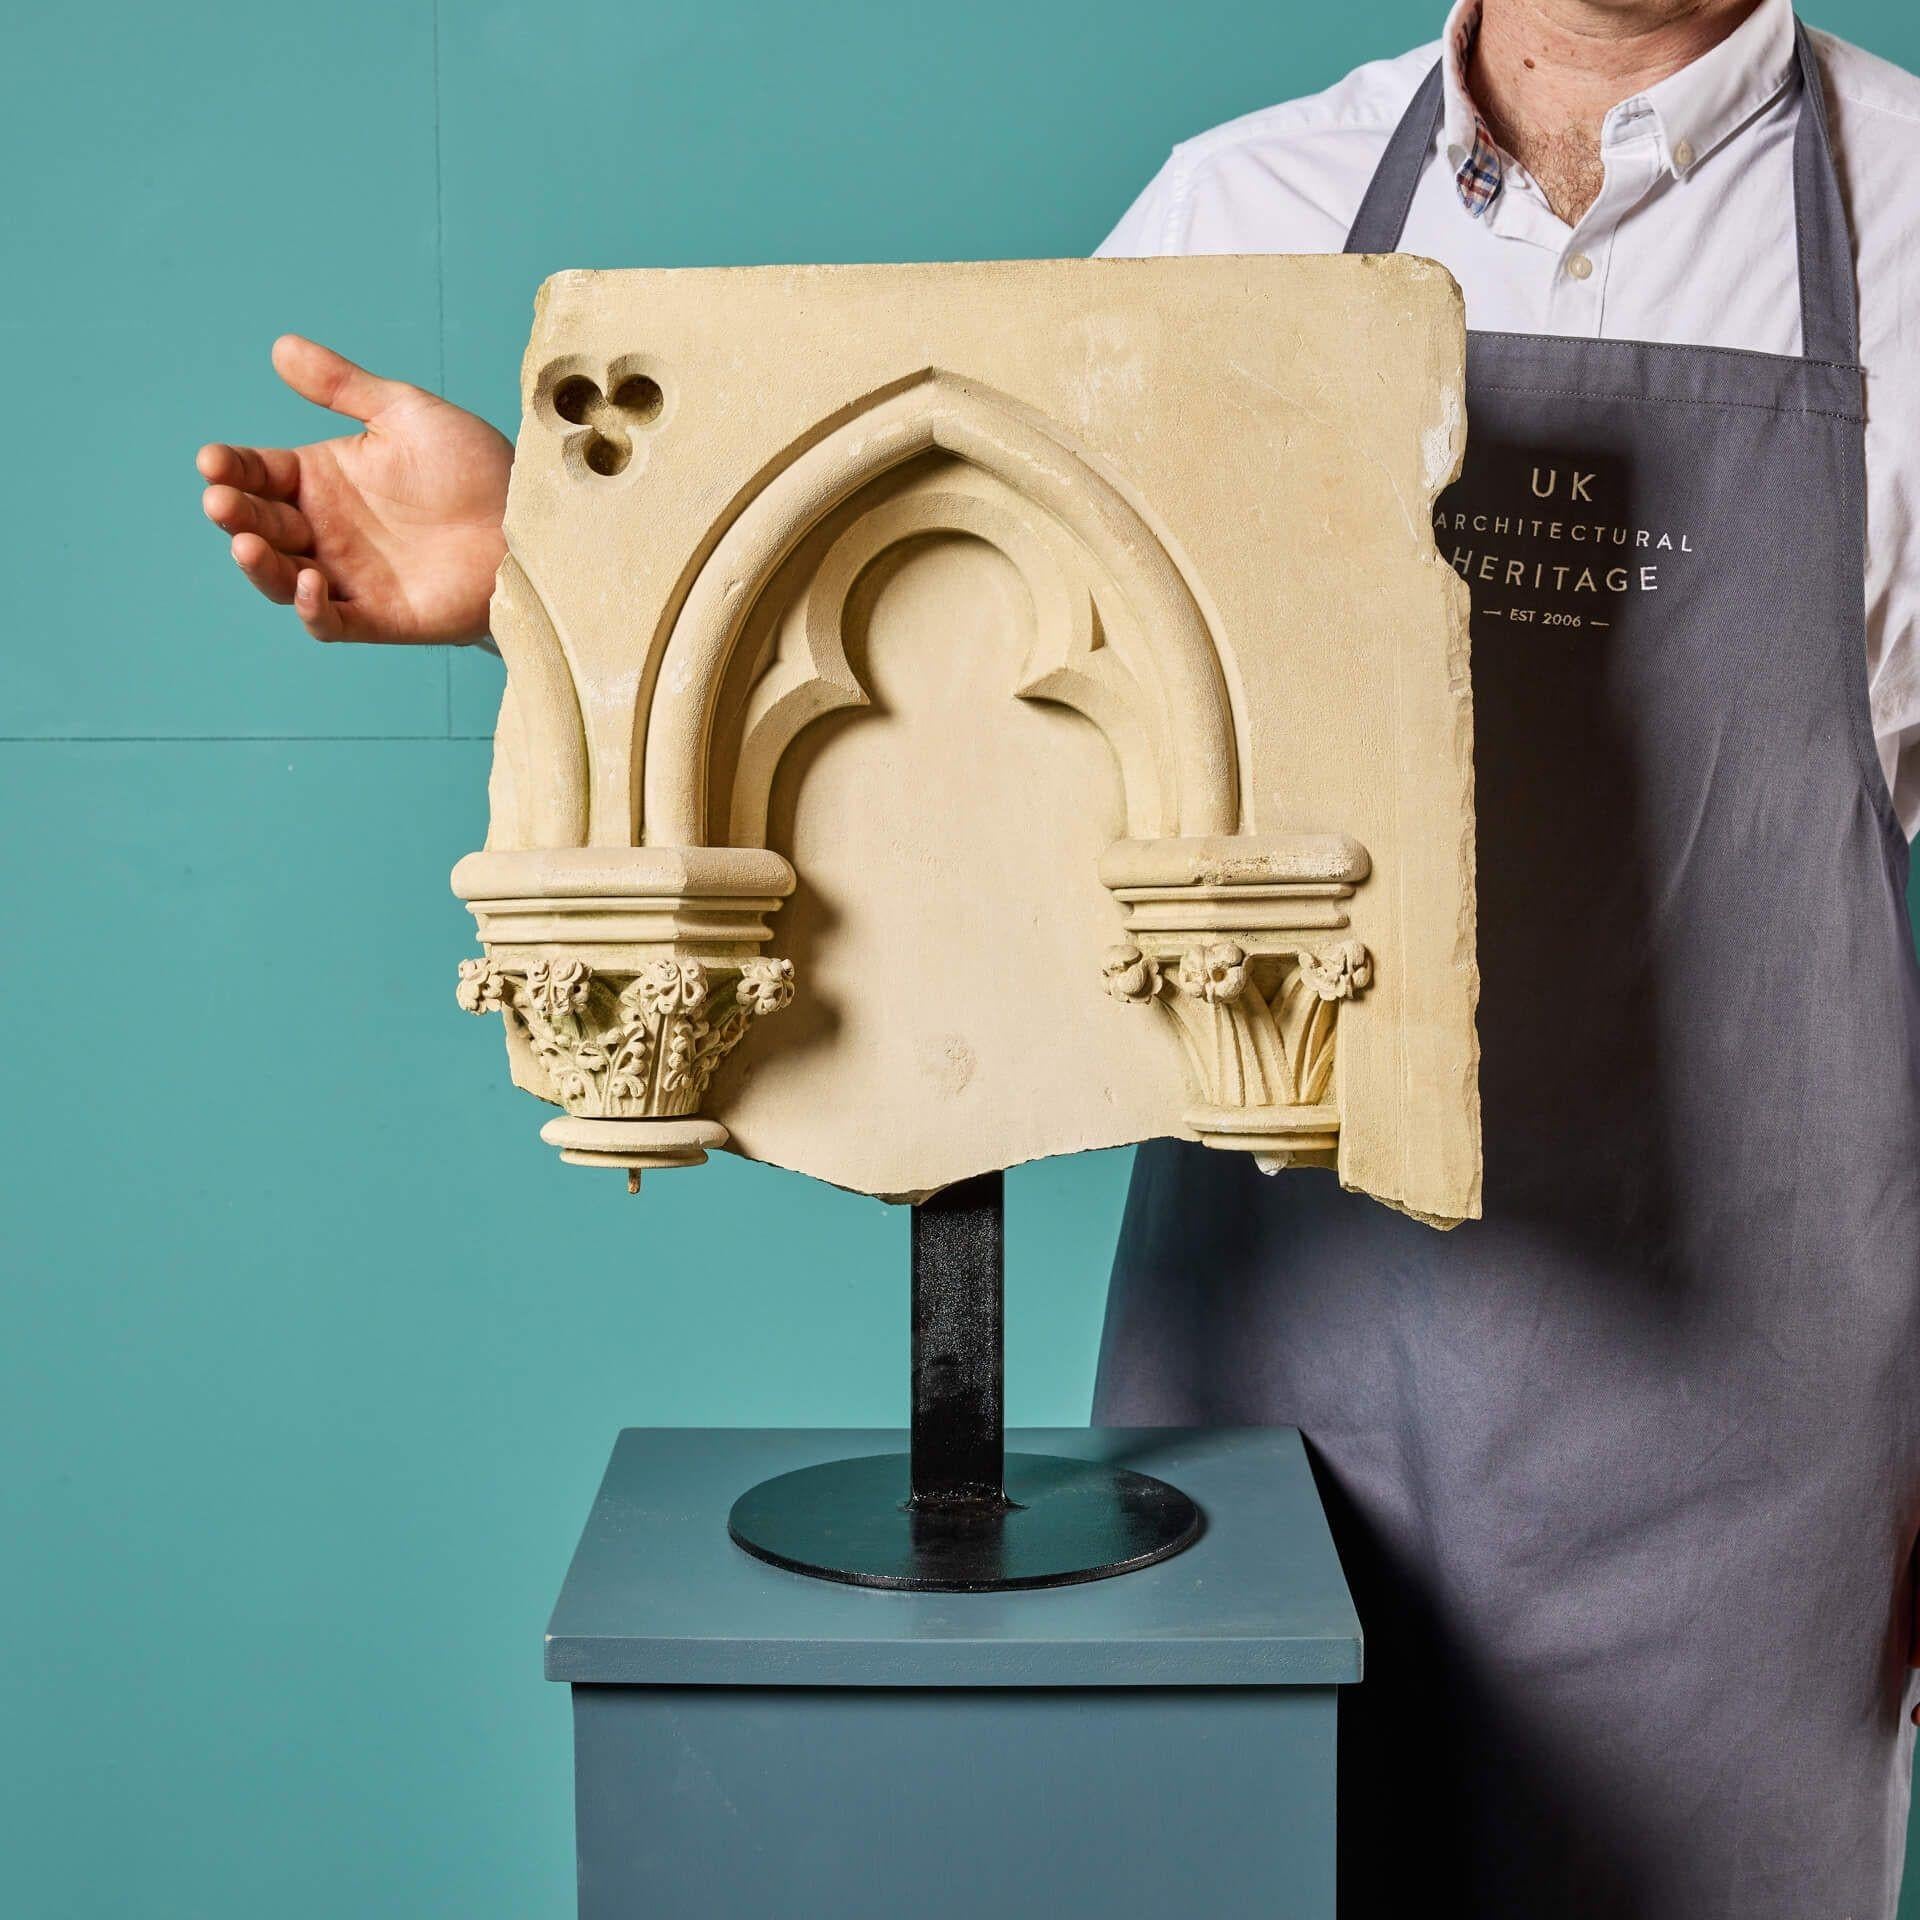 An excellent mid 19th century French Caen stone architectural fragment on stand reputedly from a church destroyed in WWII. With its beautiful cream tone and crisp quality, this carved limestone fragment is reminiscent of blind arcades found in